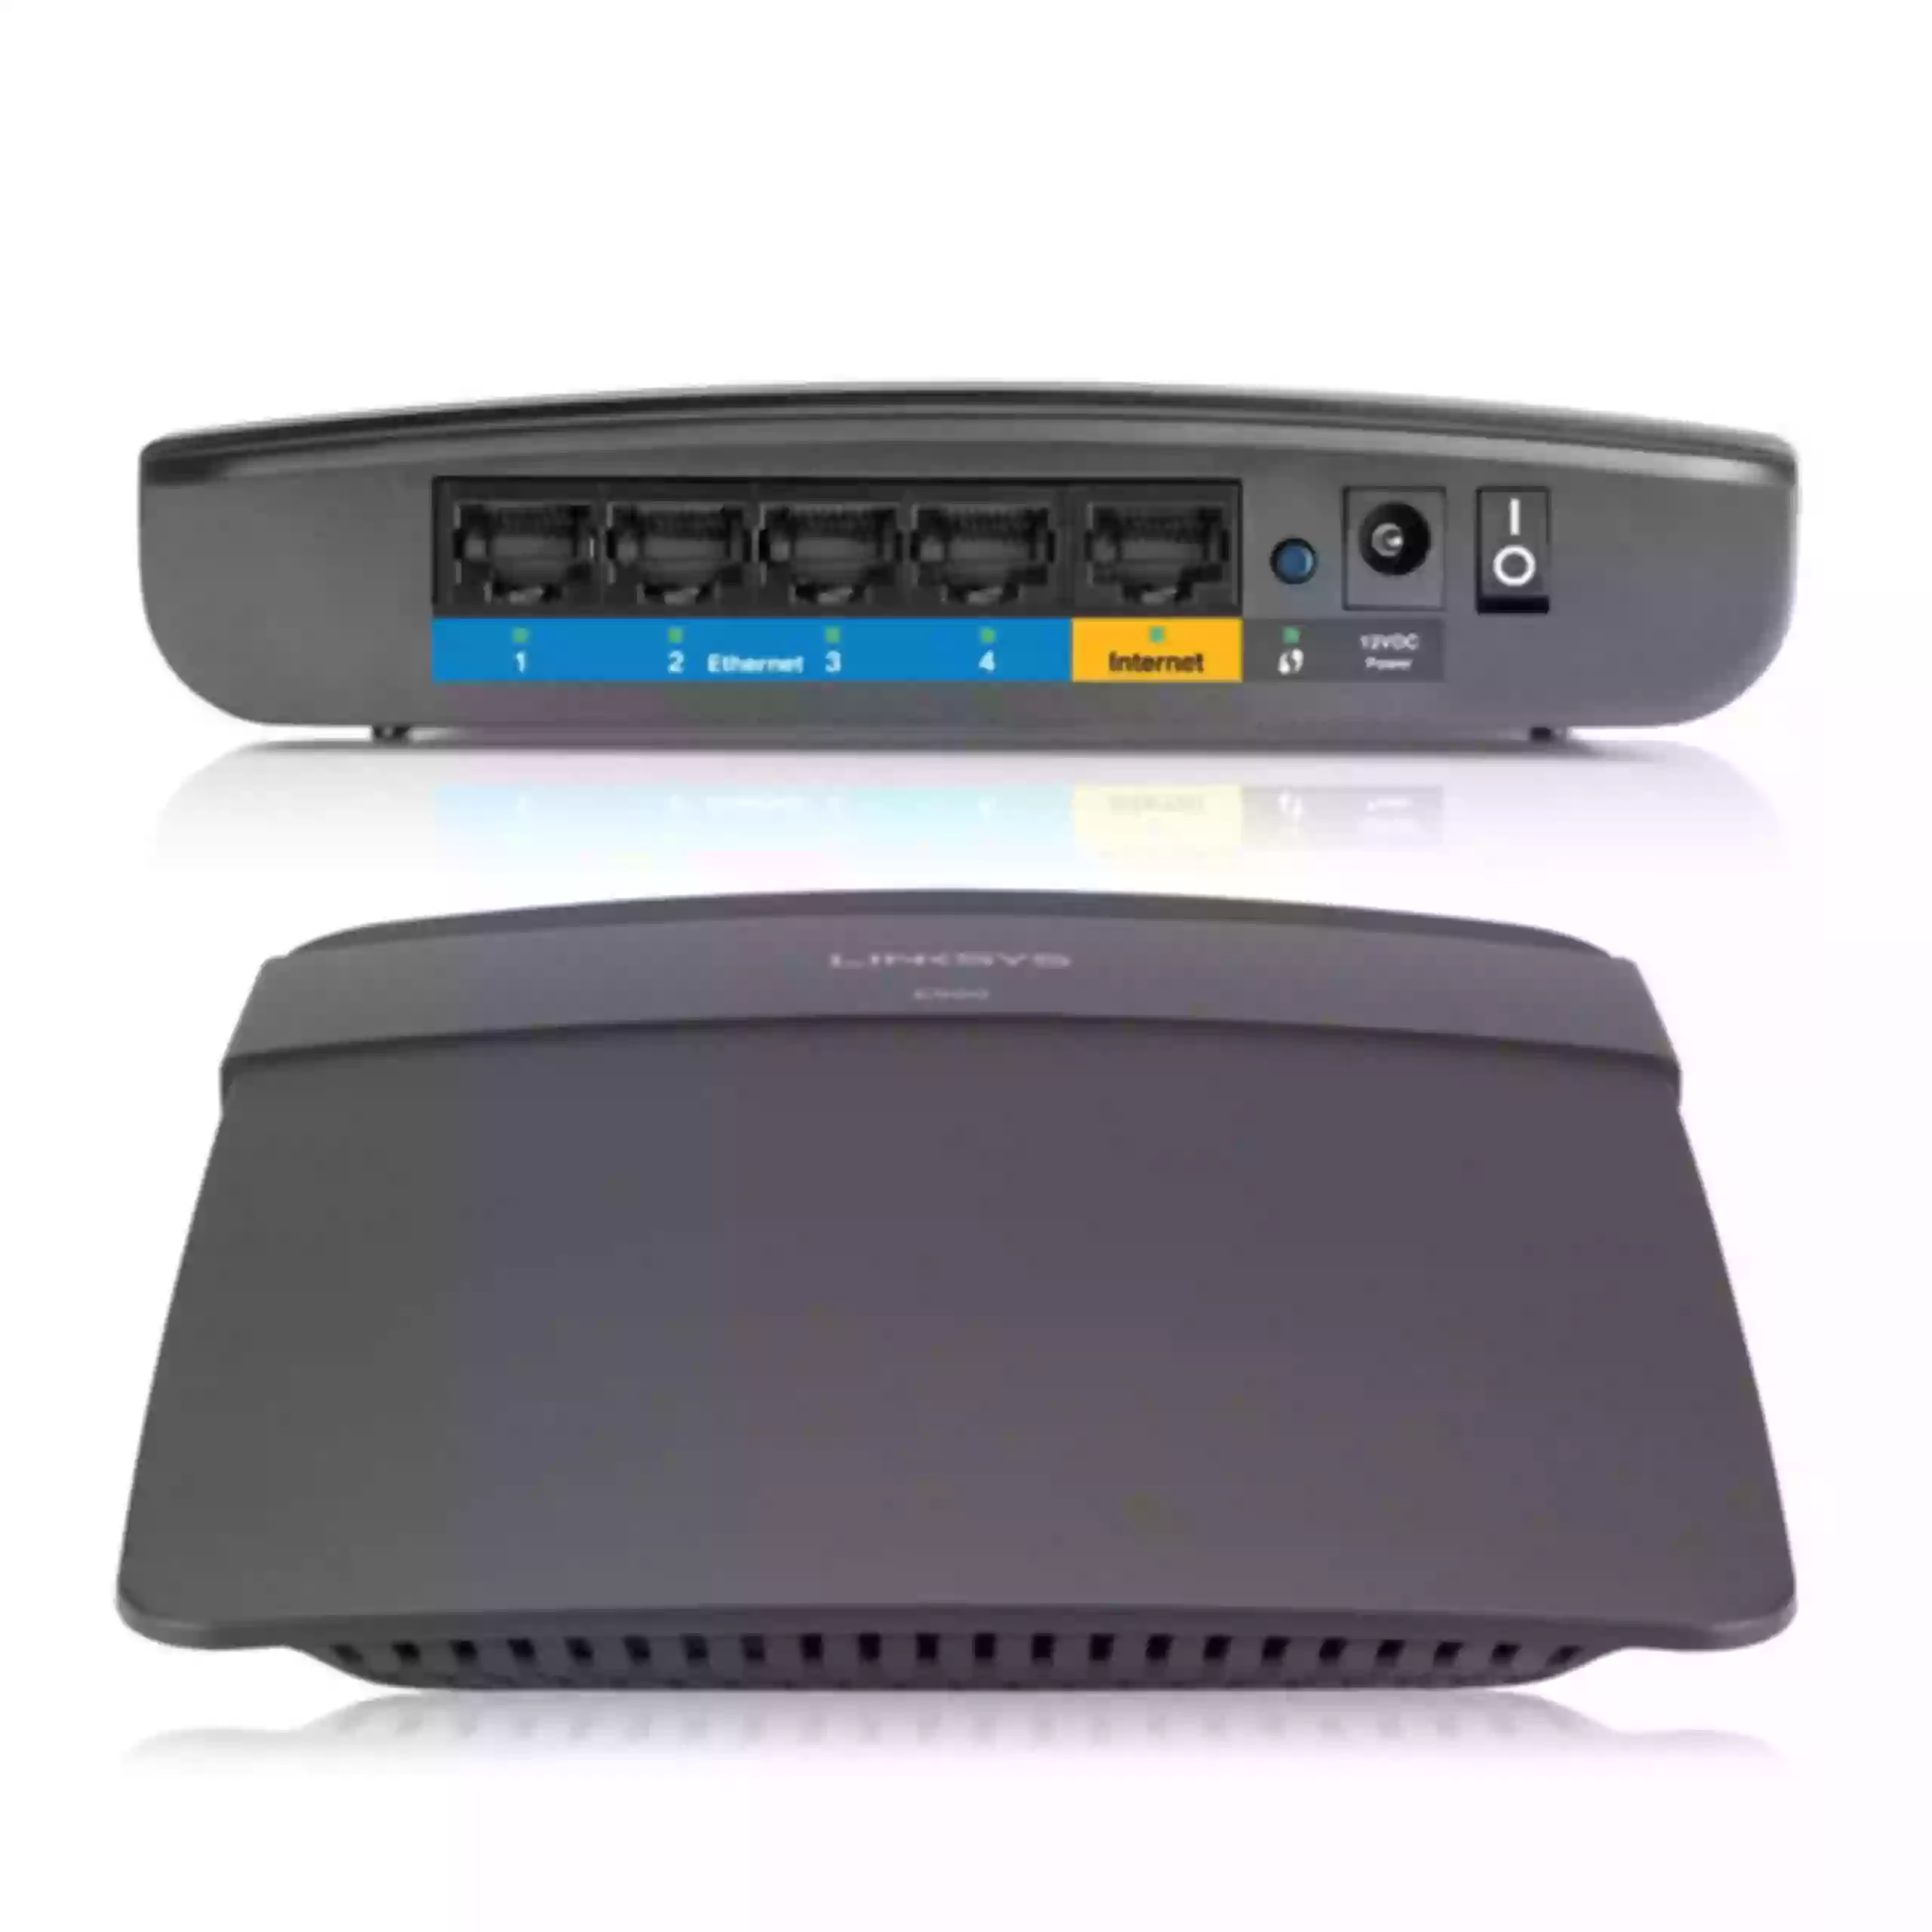 Cisco Linksys E900 Refurbished Wireless Router